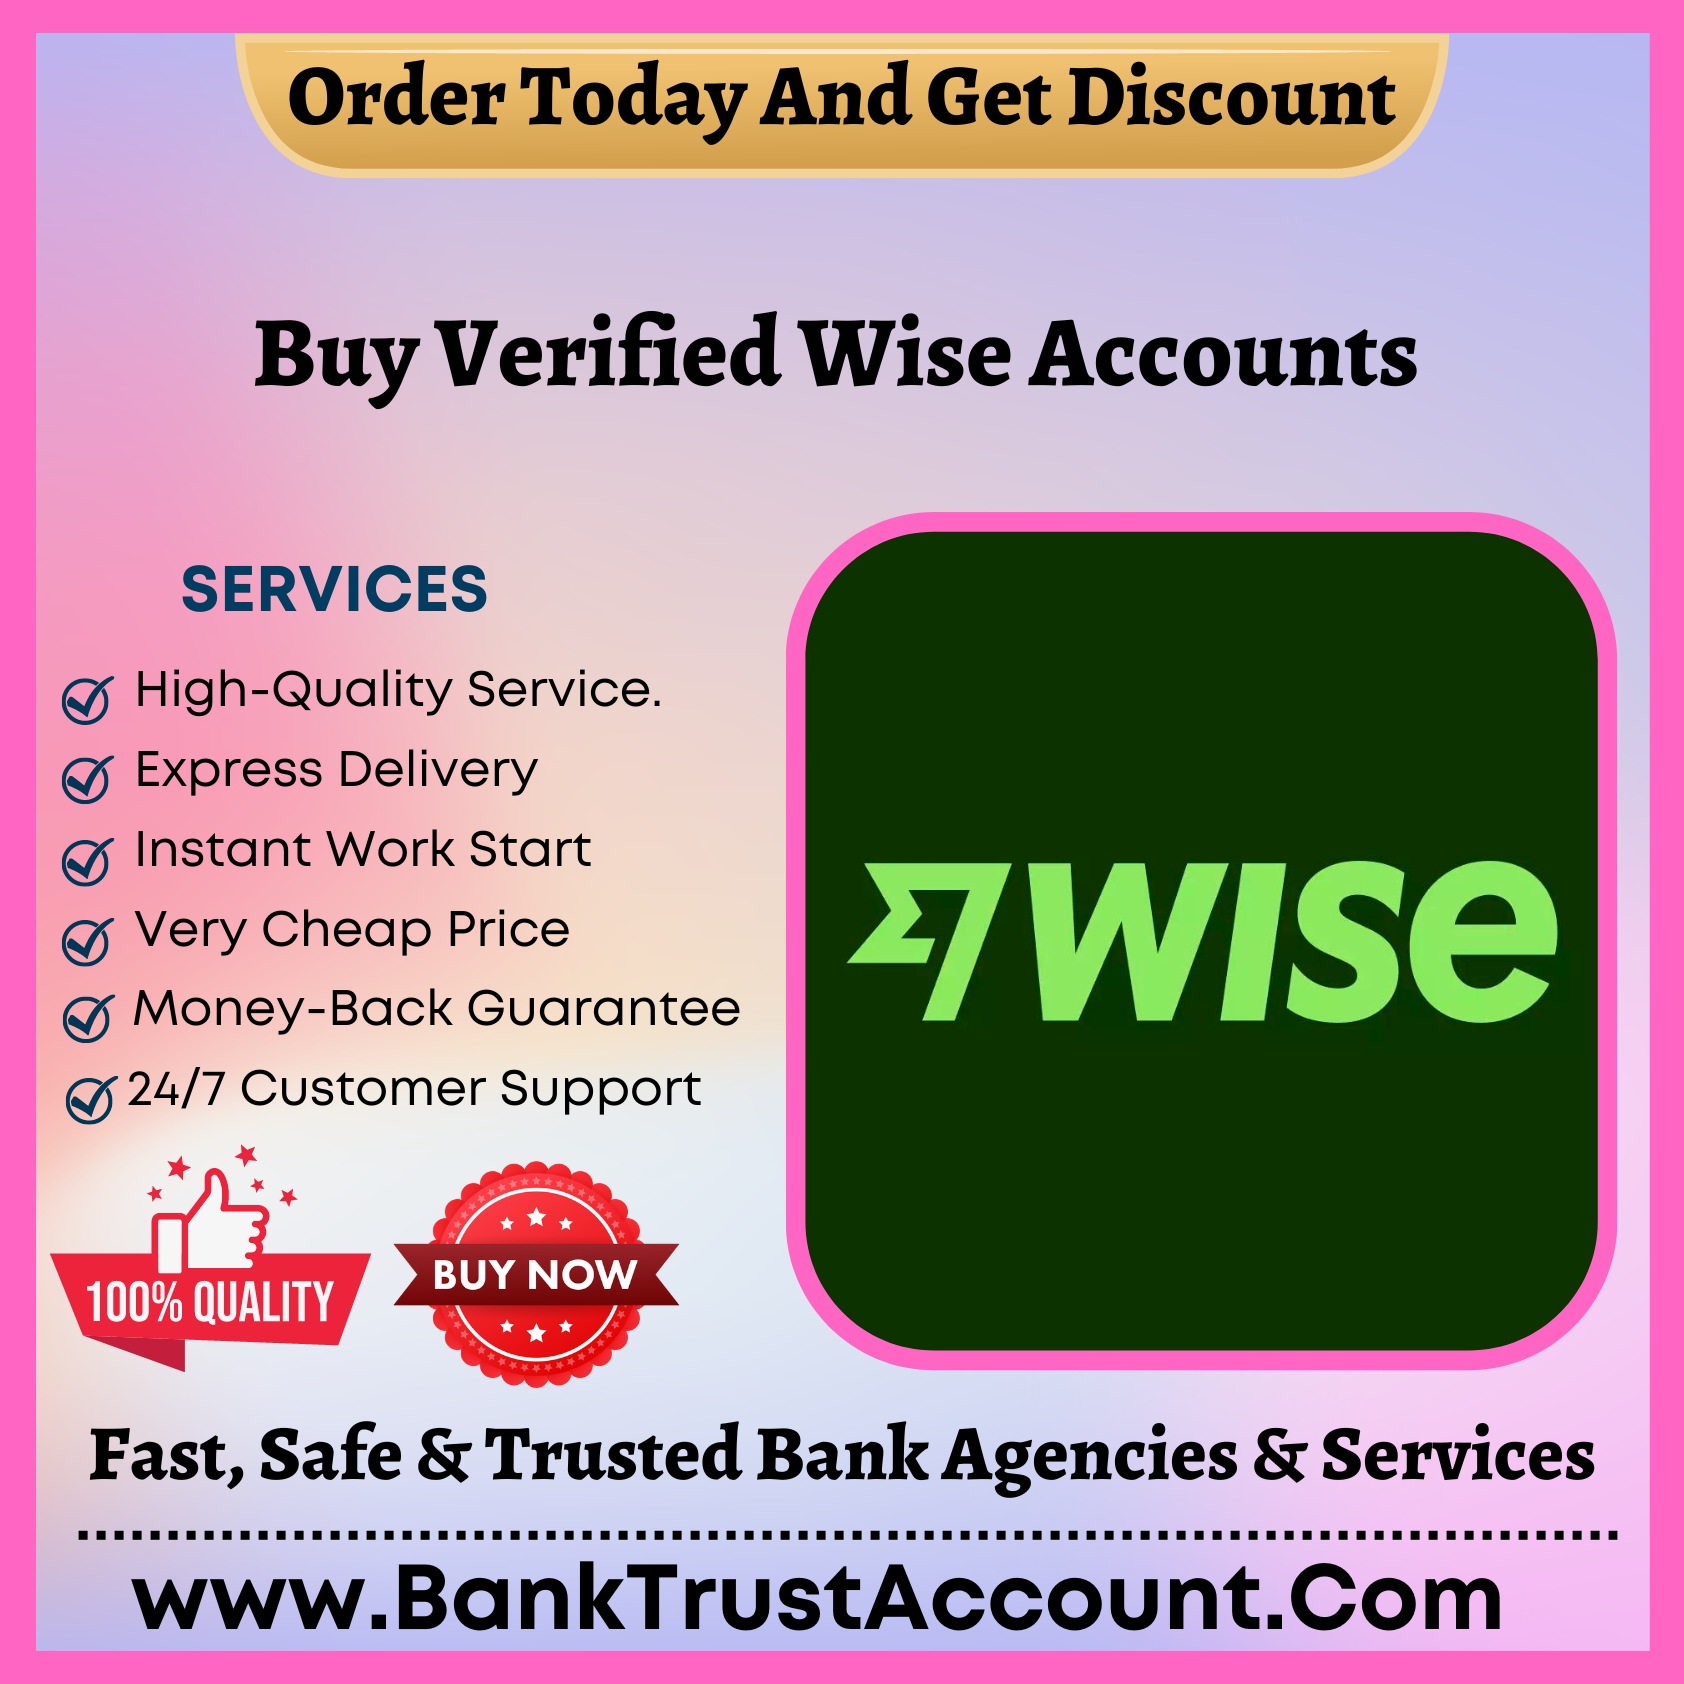 Buy Verified Wise Accounts - 100% Best Fully KYC Verified -BankTrustAccount